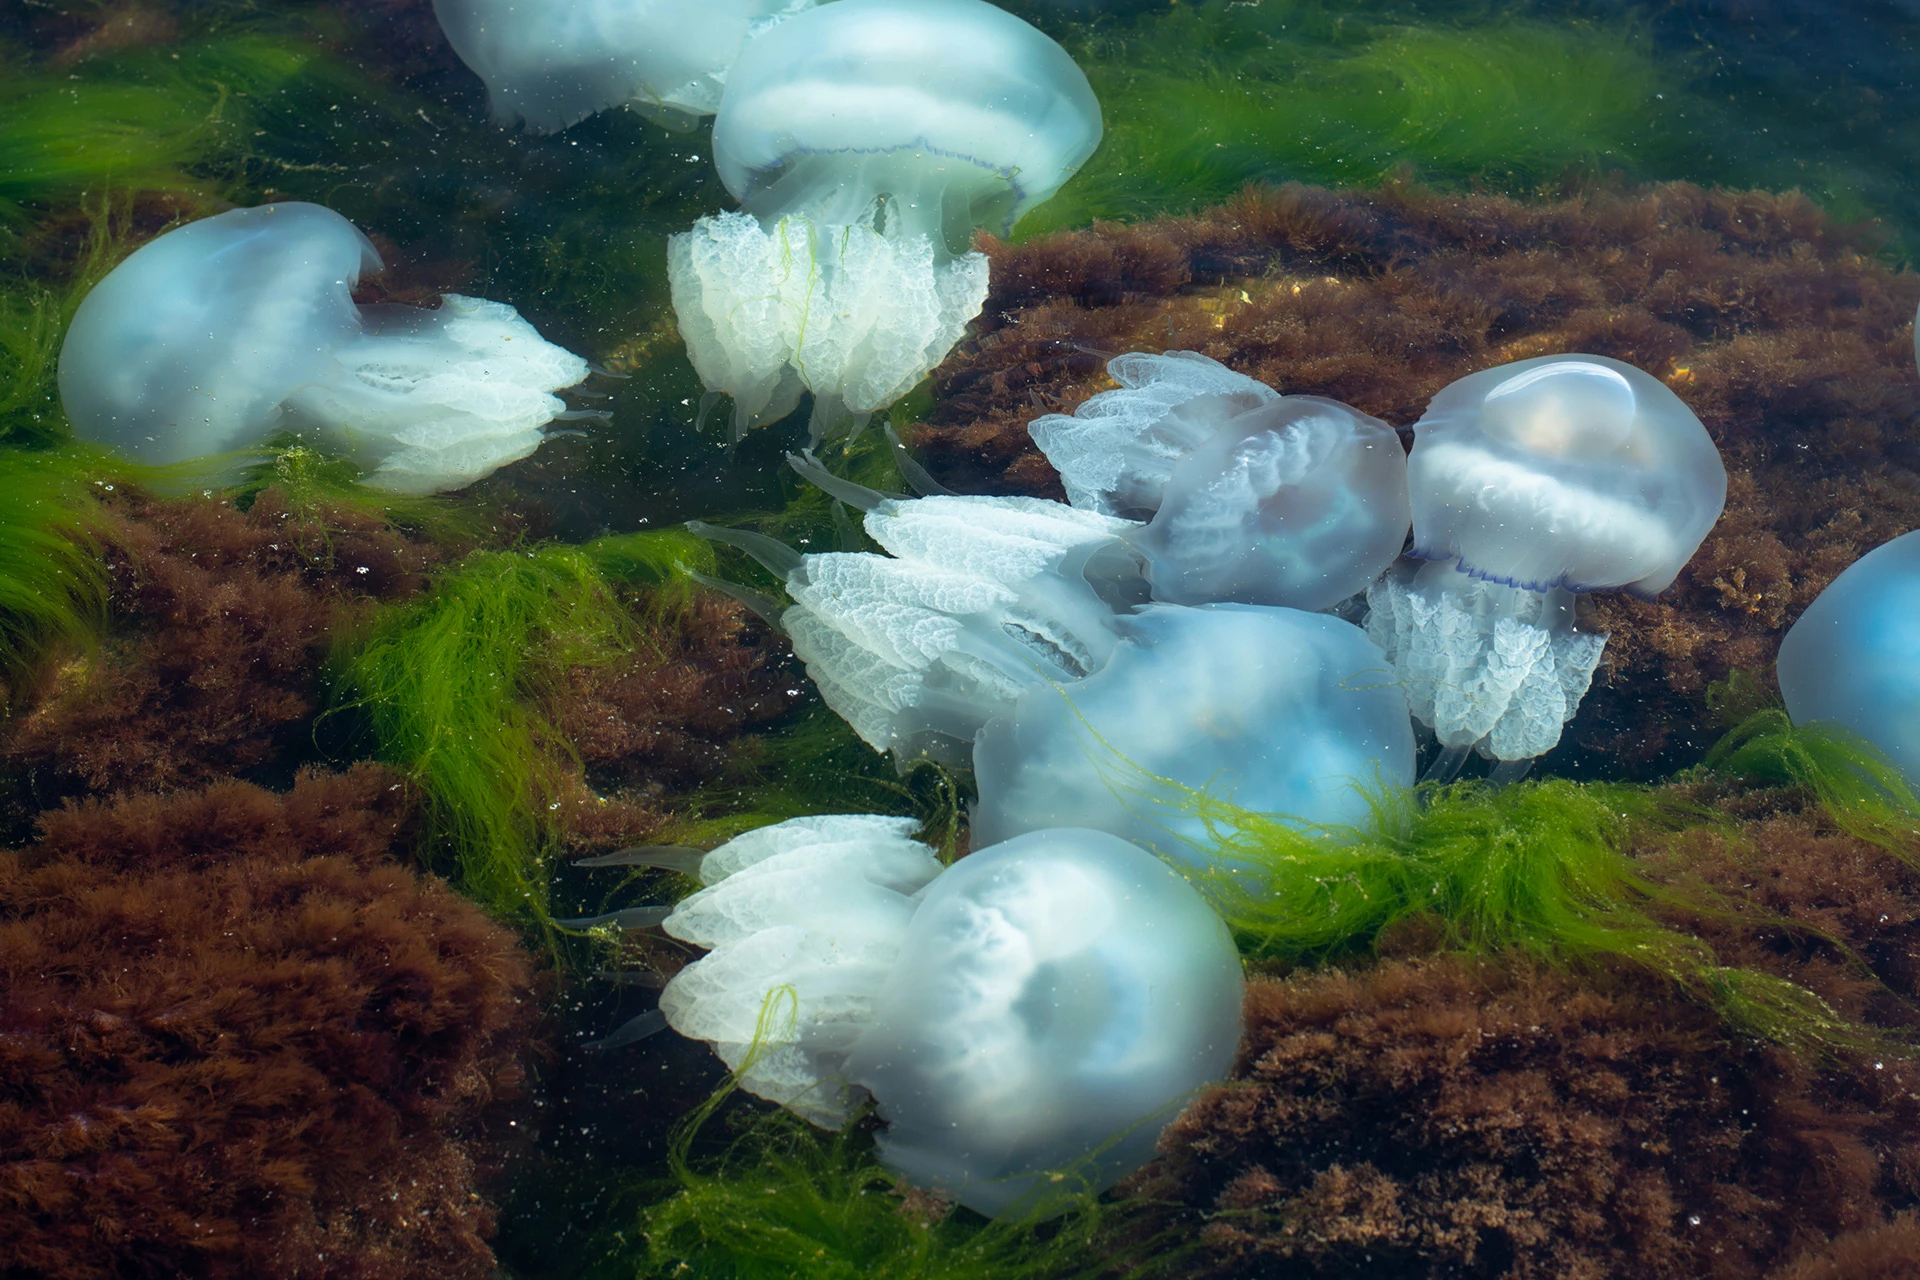 Jellyfish should become the next popular seafood, researchers say